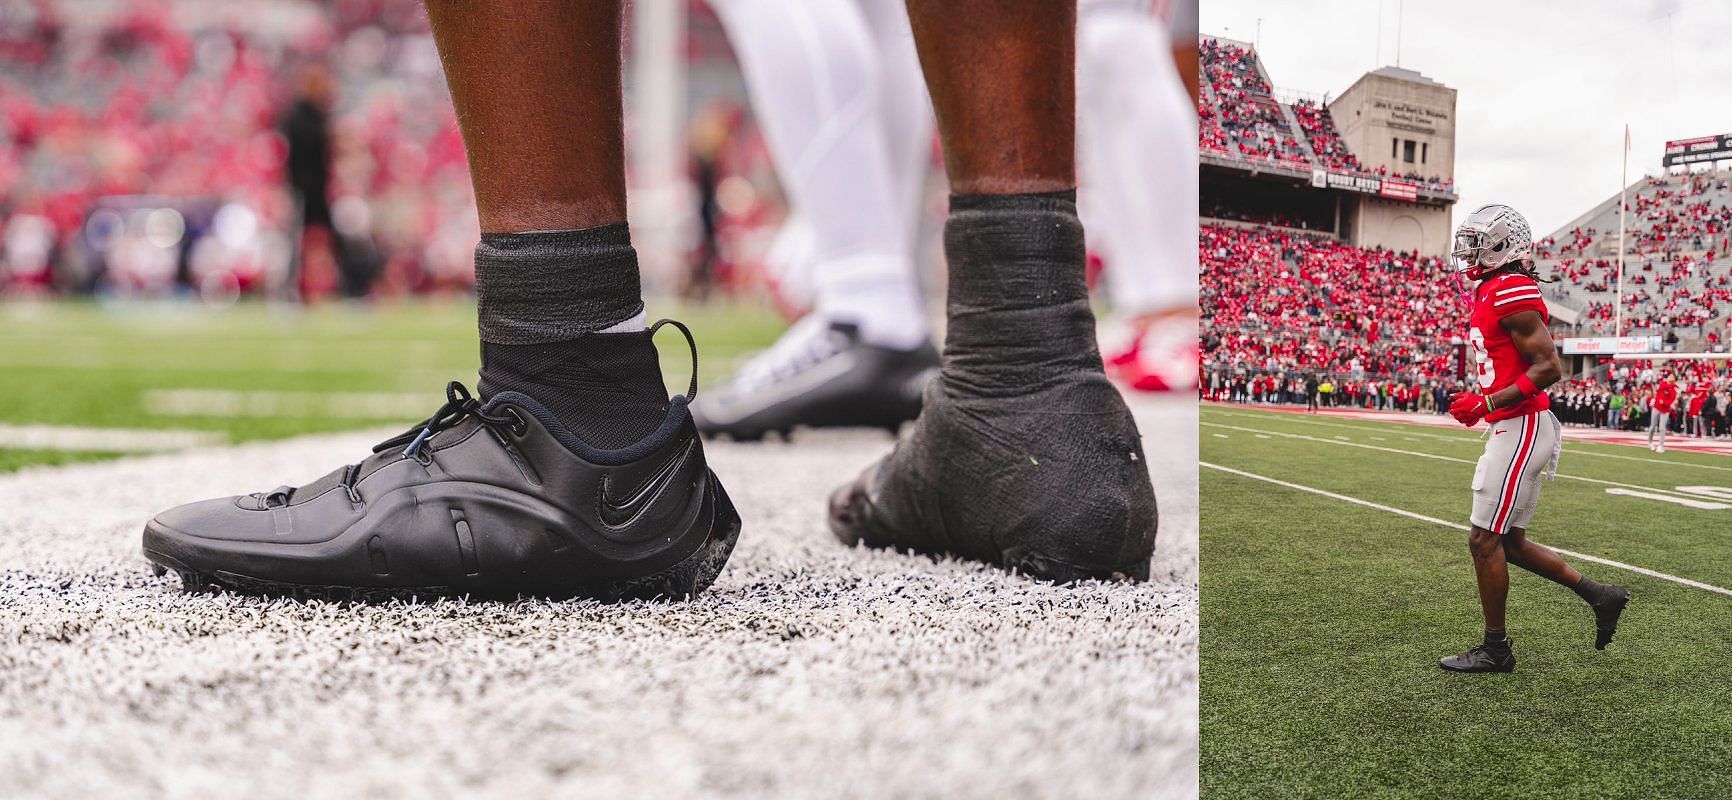 Let's go 18”: LeBron James hyped as Ohio State's Marvin Harris Jr. sports  his custom cleats